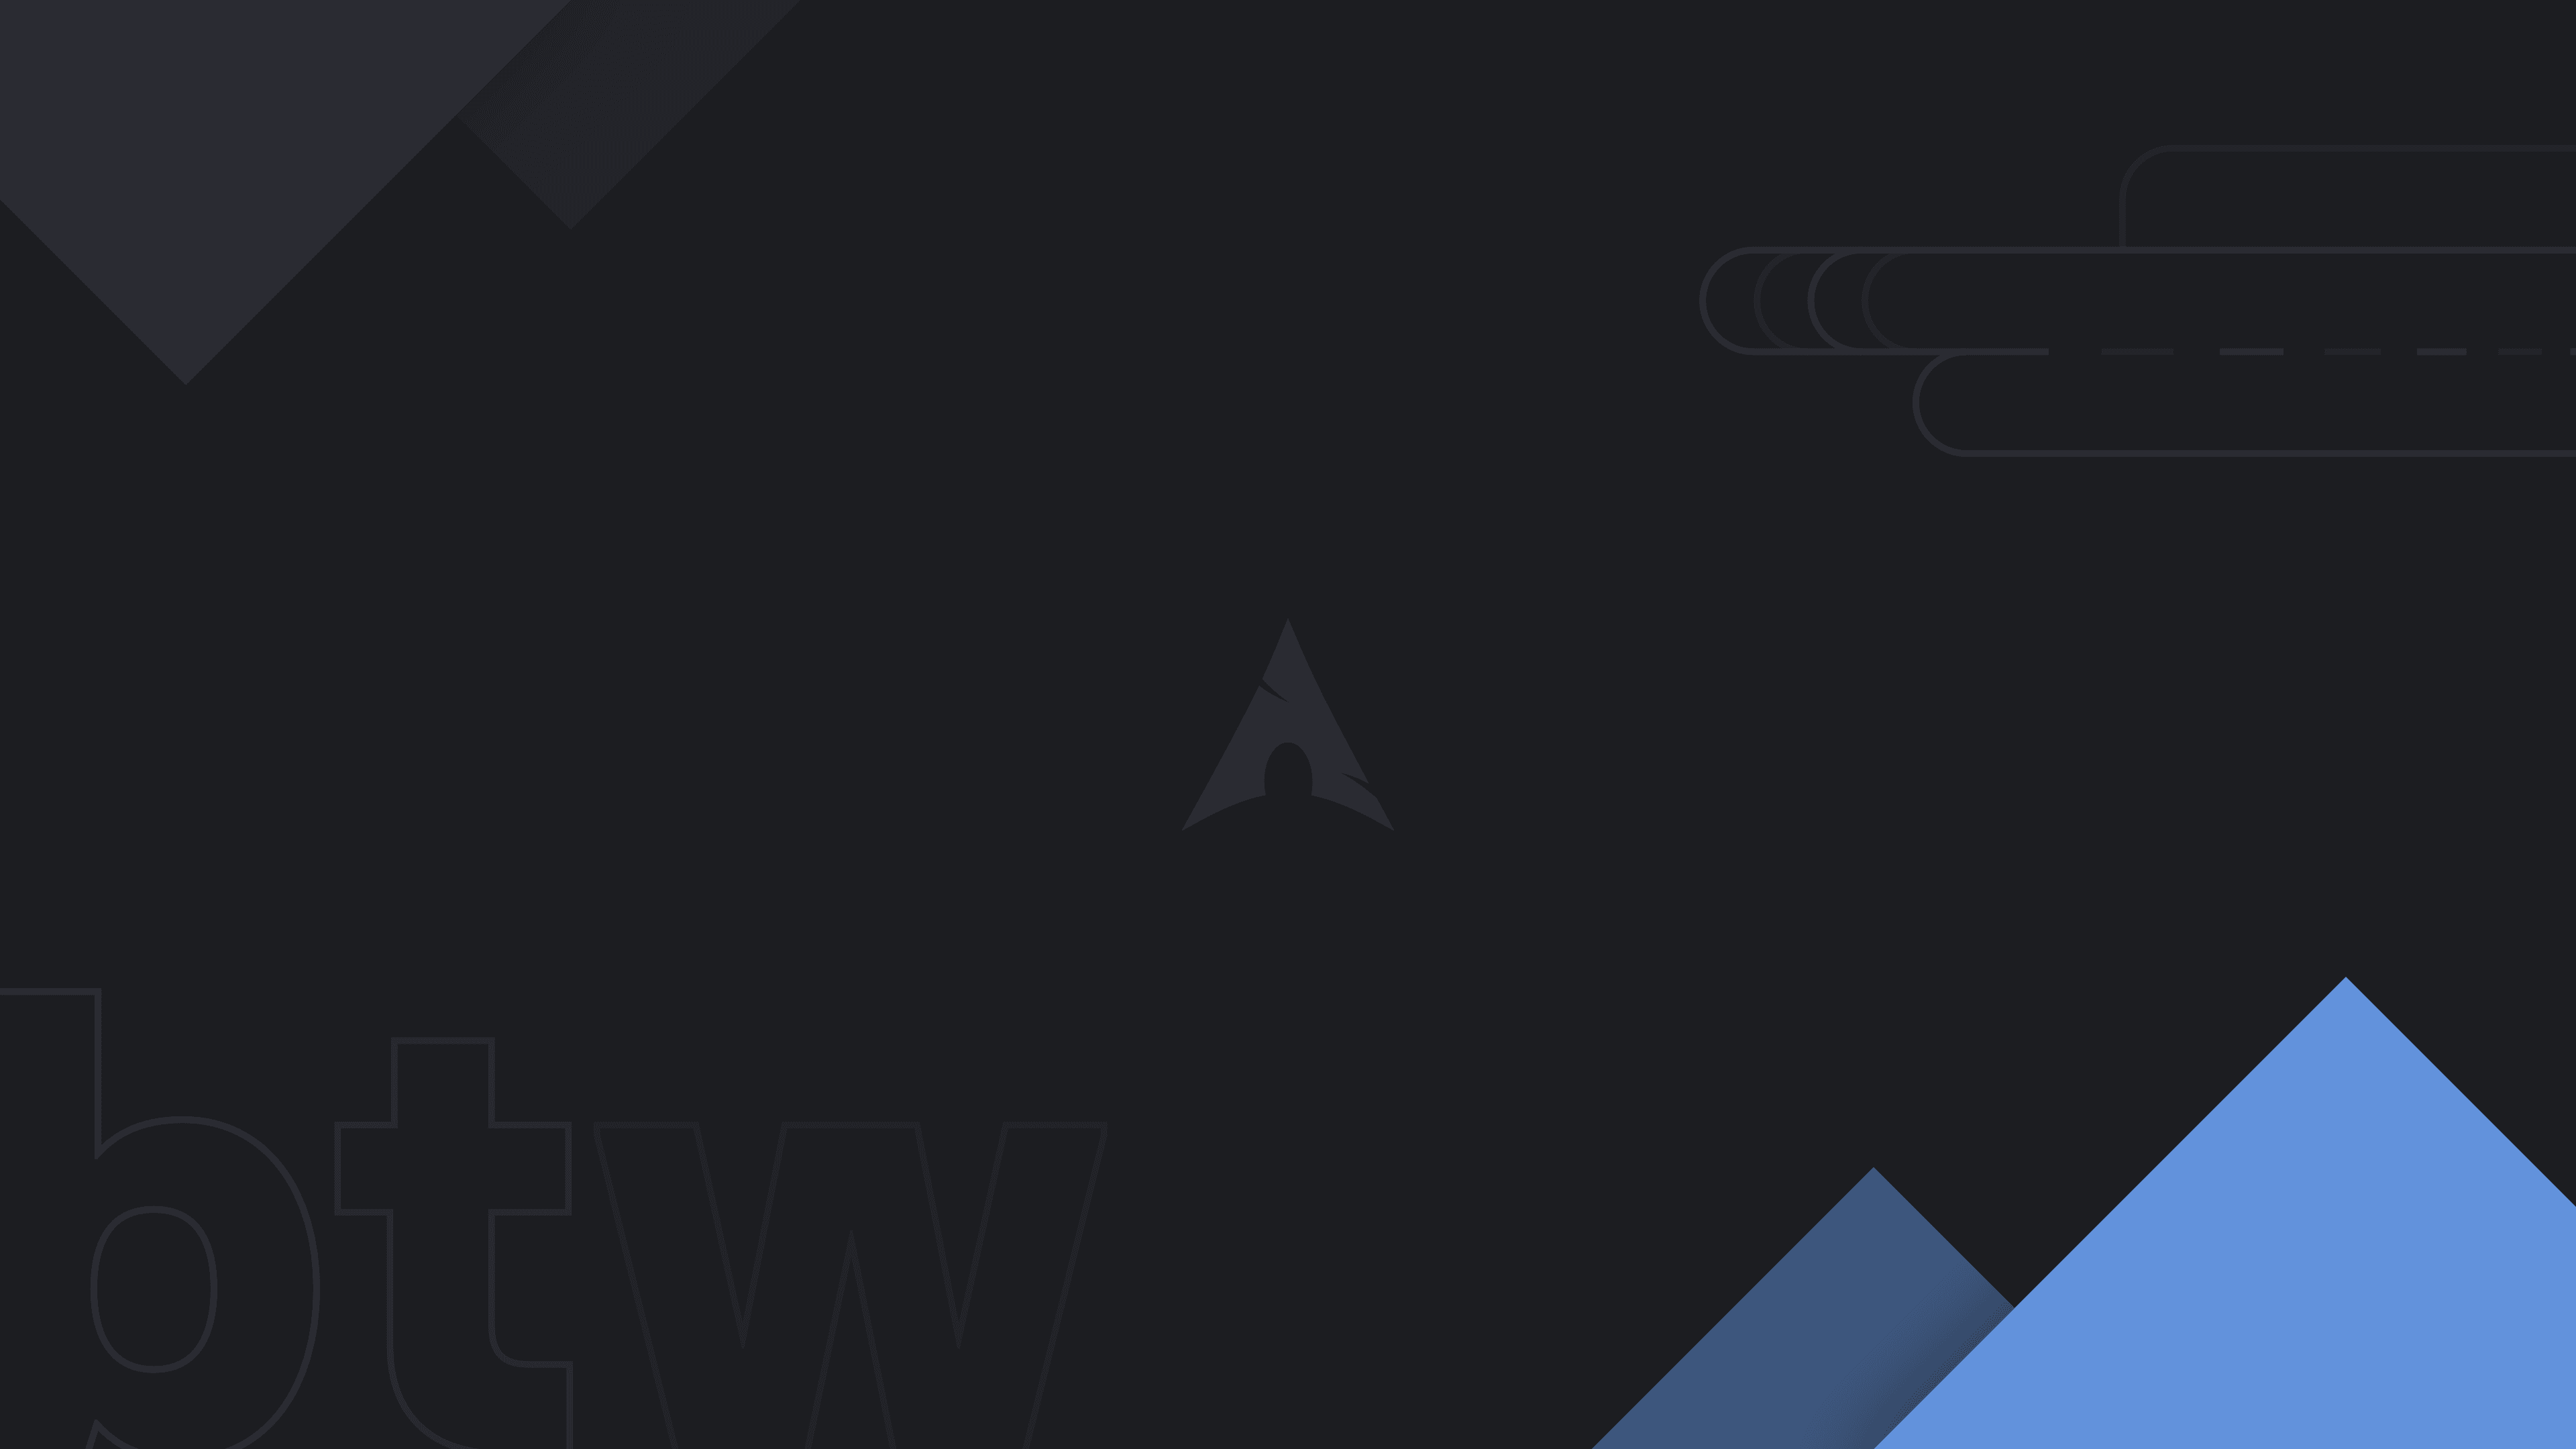 General 3840x2160 Linux Arch Linux mountains logo text black background minimalism digital art operating system